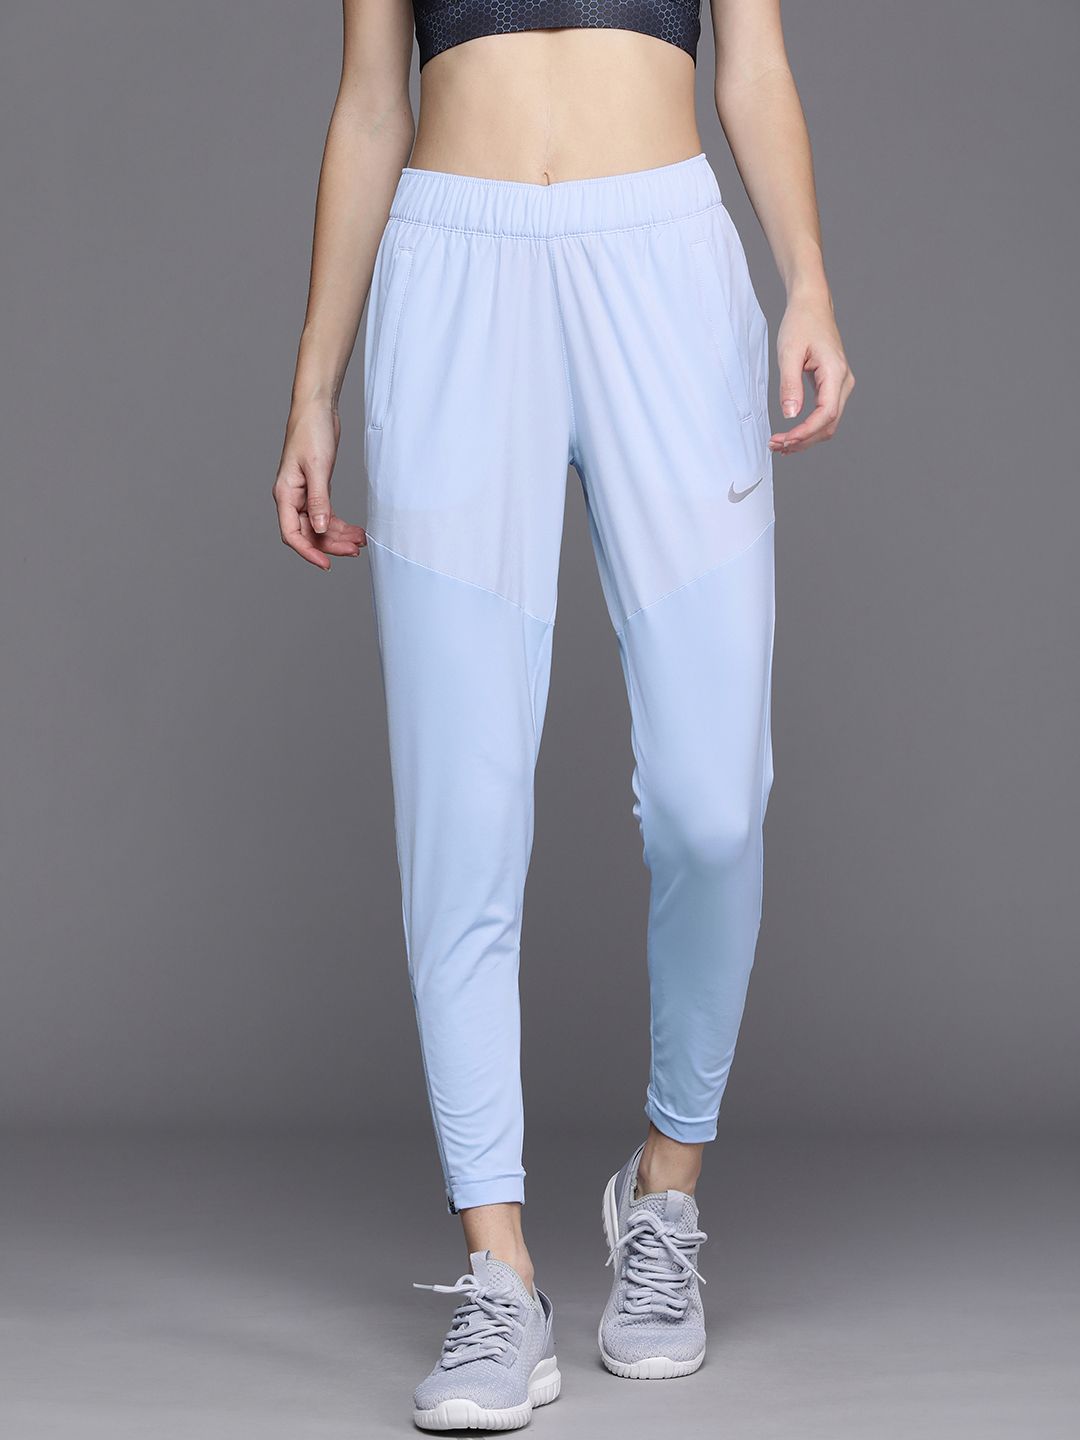 Nike Women Blue Dry-Fit Slim Fit Track Pants Price in India